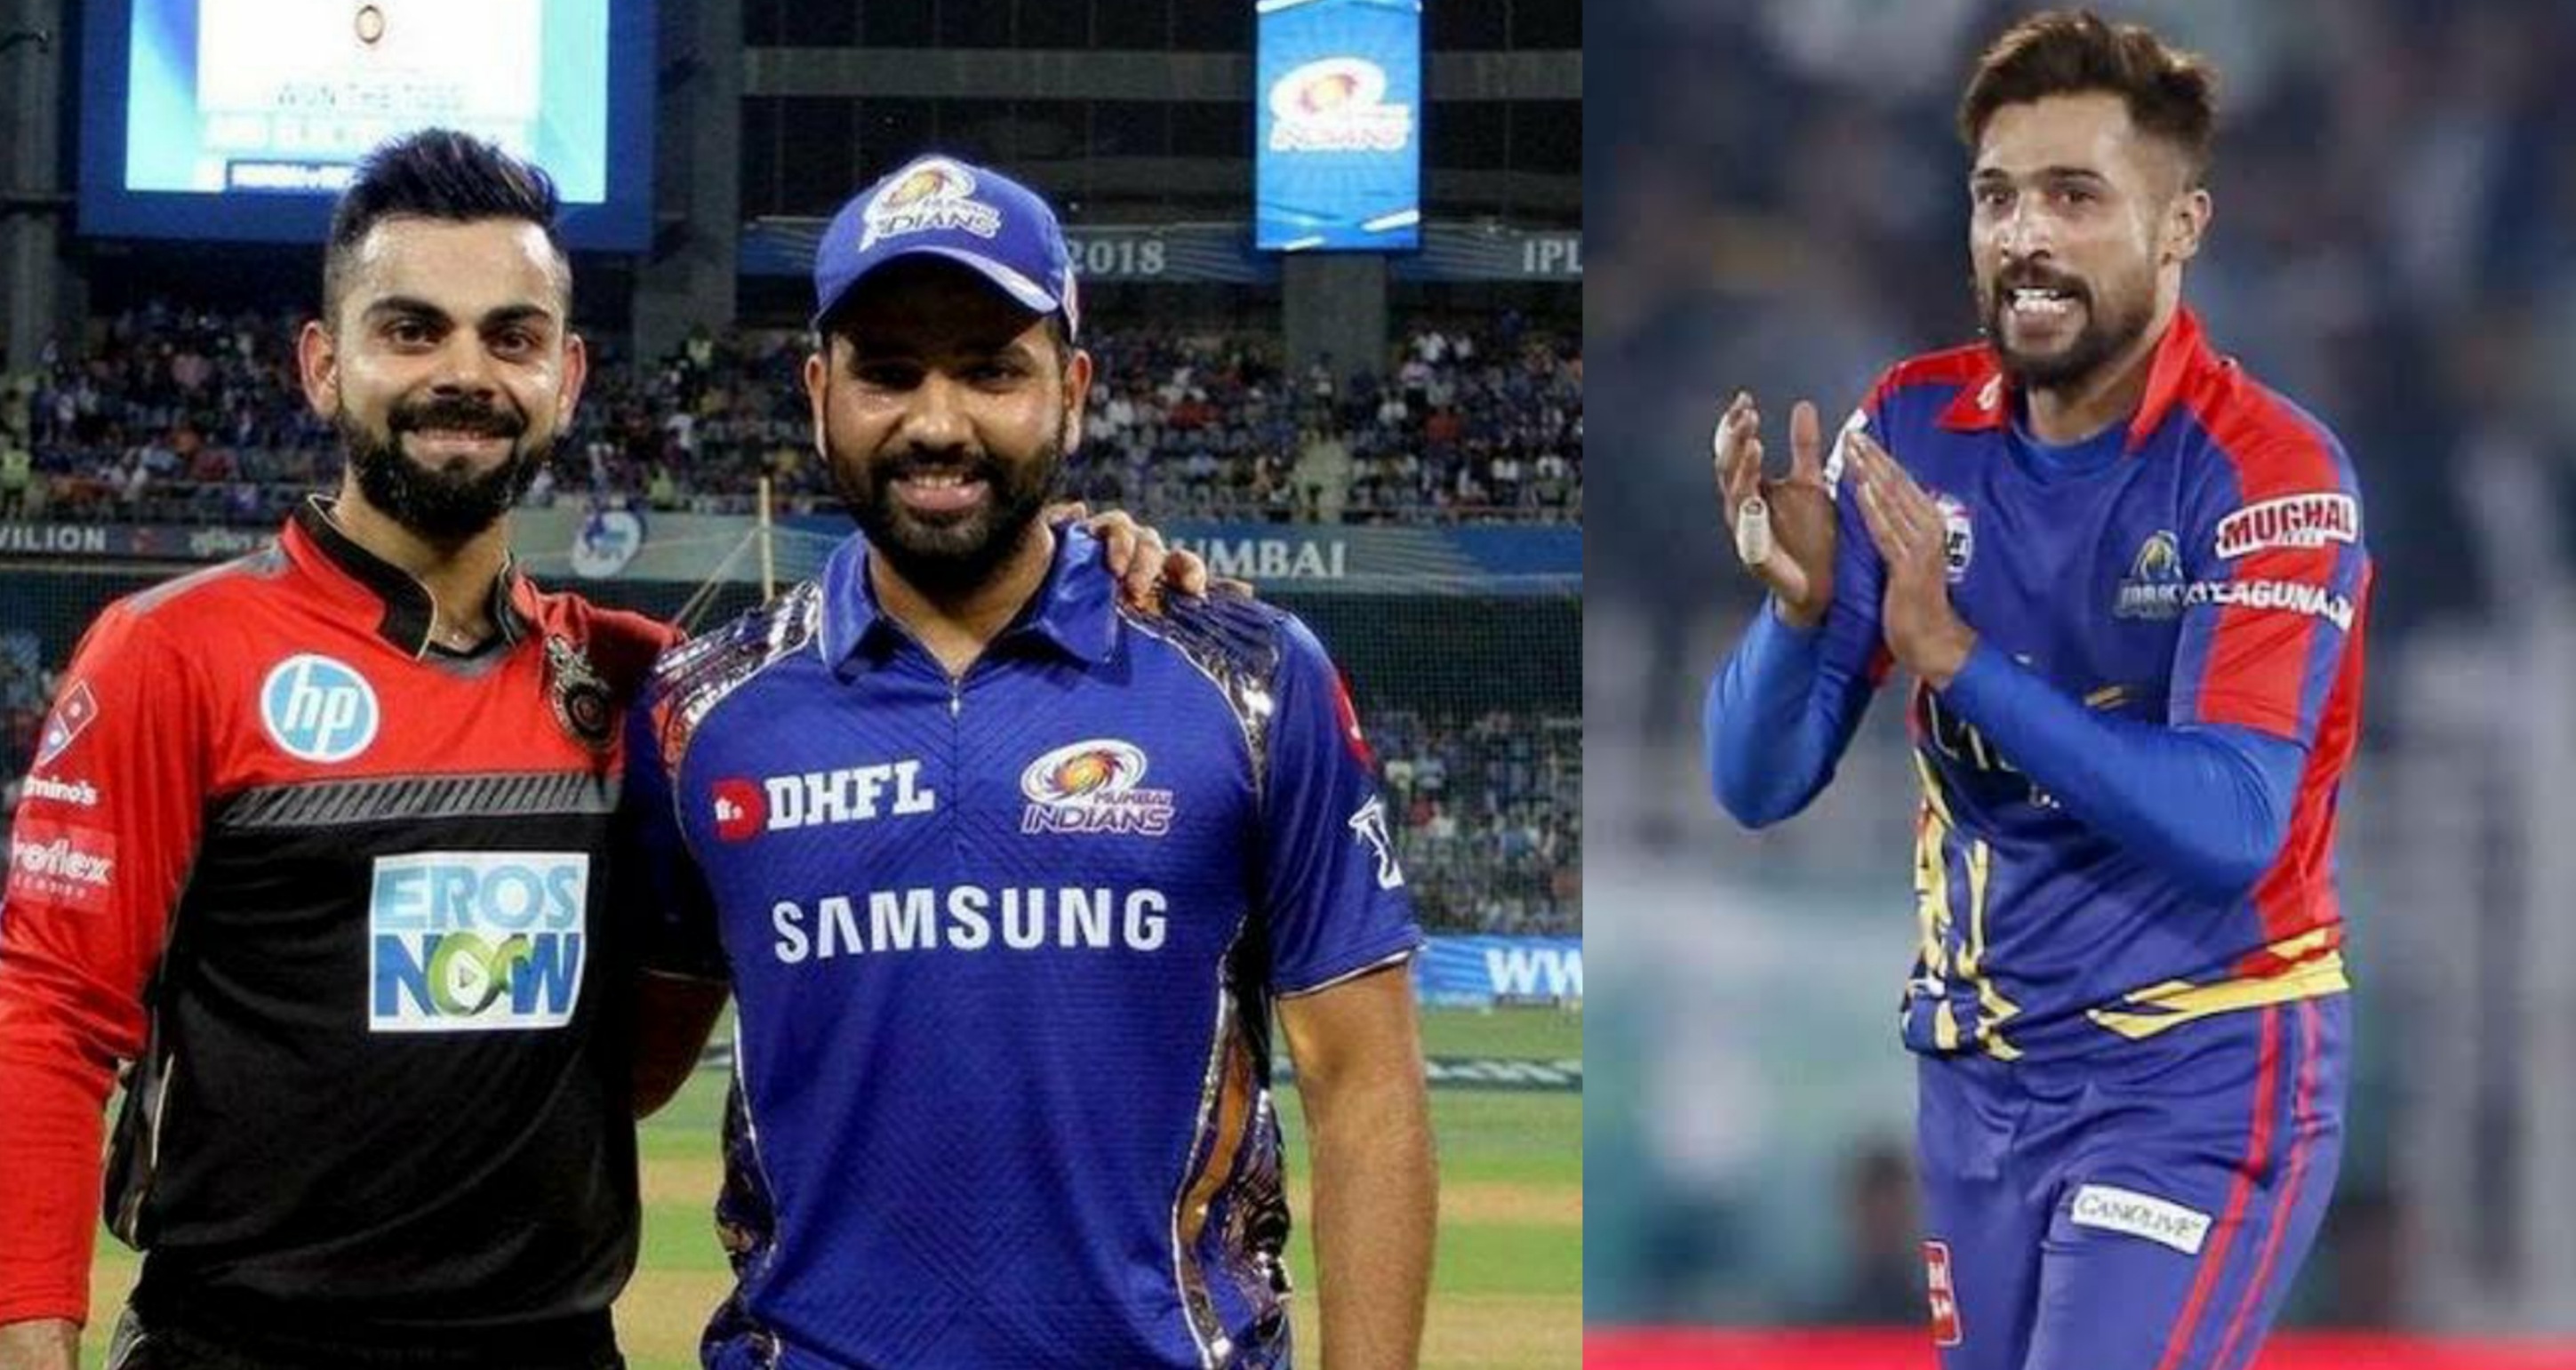 Virat Kohli and Rohit Sharma in PSL? Mohammad Amir says he would love to bowl against them in the tournament